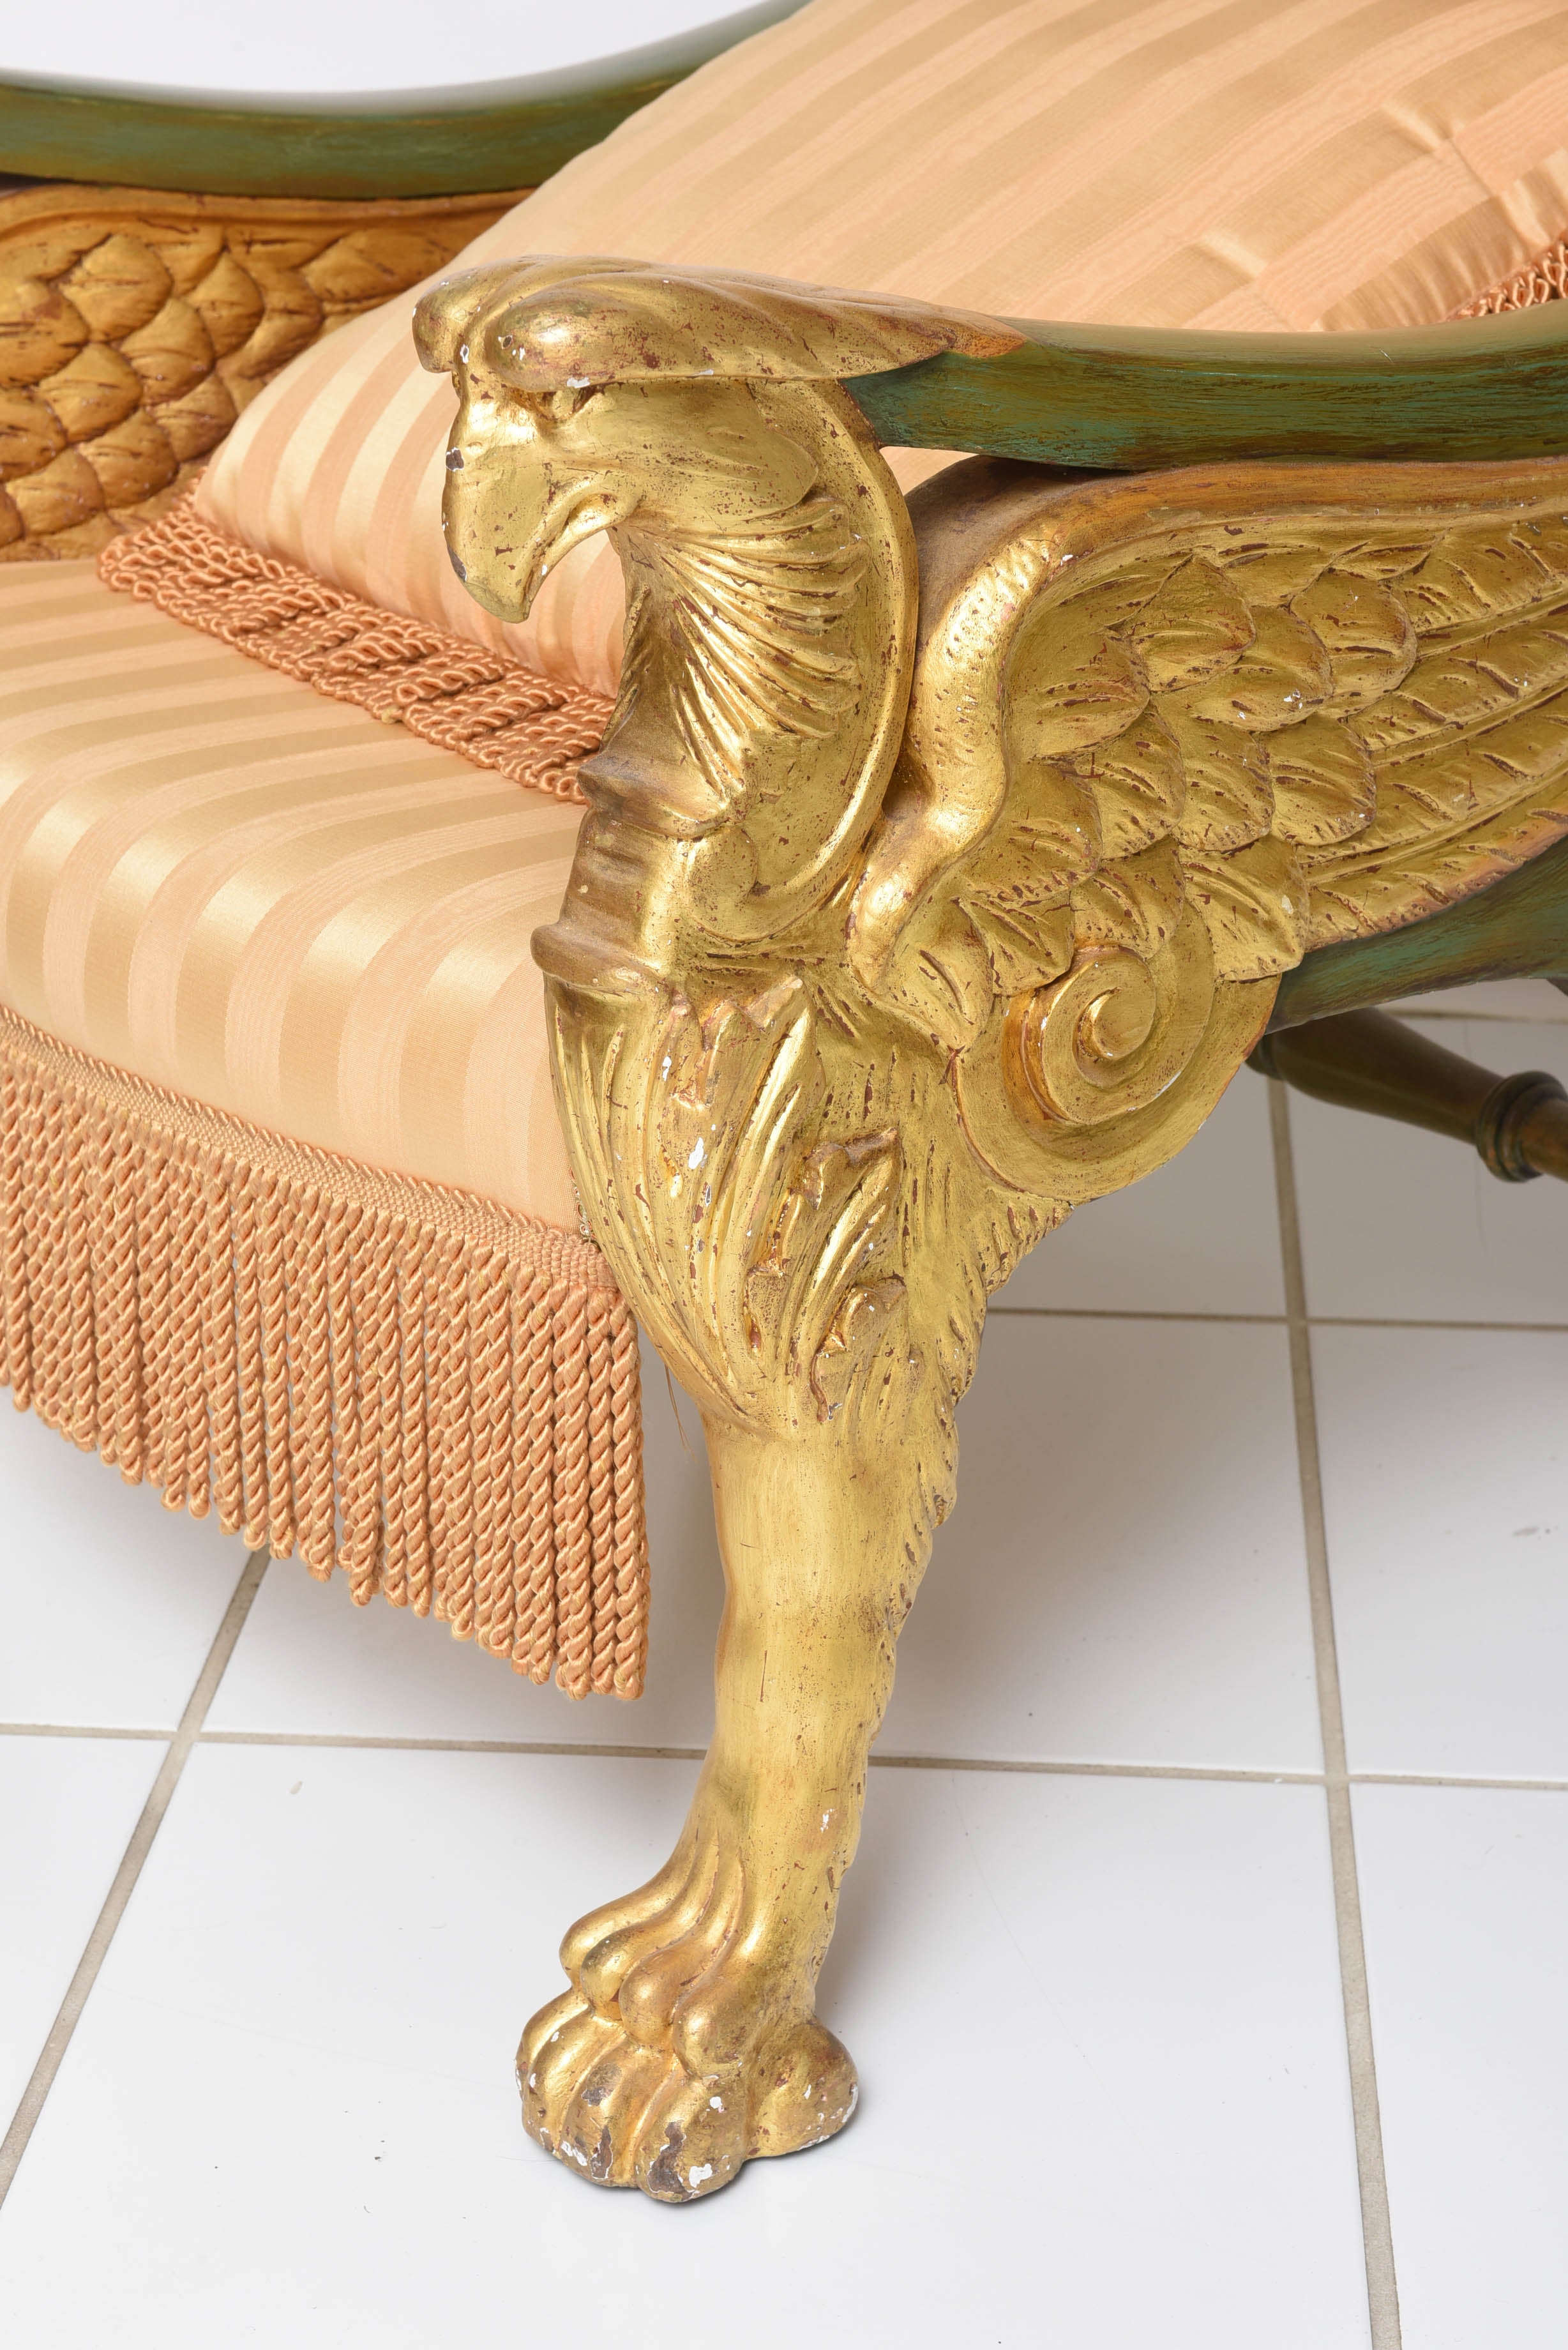 Charles Heathcote Tatham (1772-1842) was an English architect who designed and supplied furniture during the regency period.

This extraordinary carved giltwood throne chair is upholstered in silk and has winged griffon sides and feet.  The back